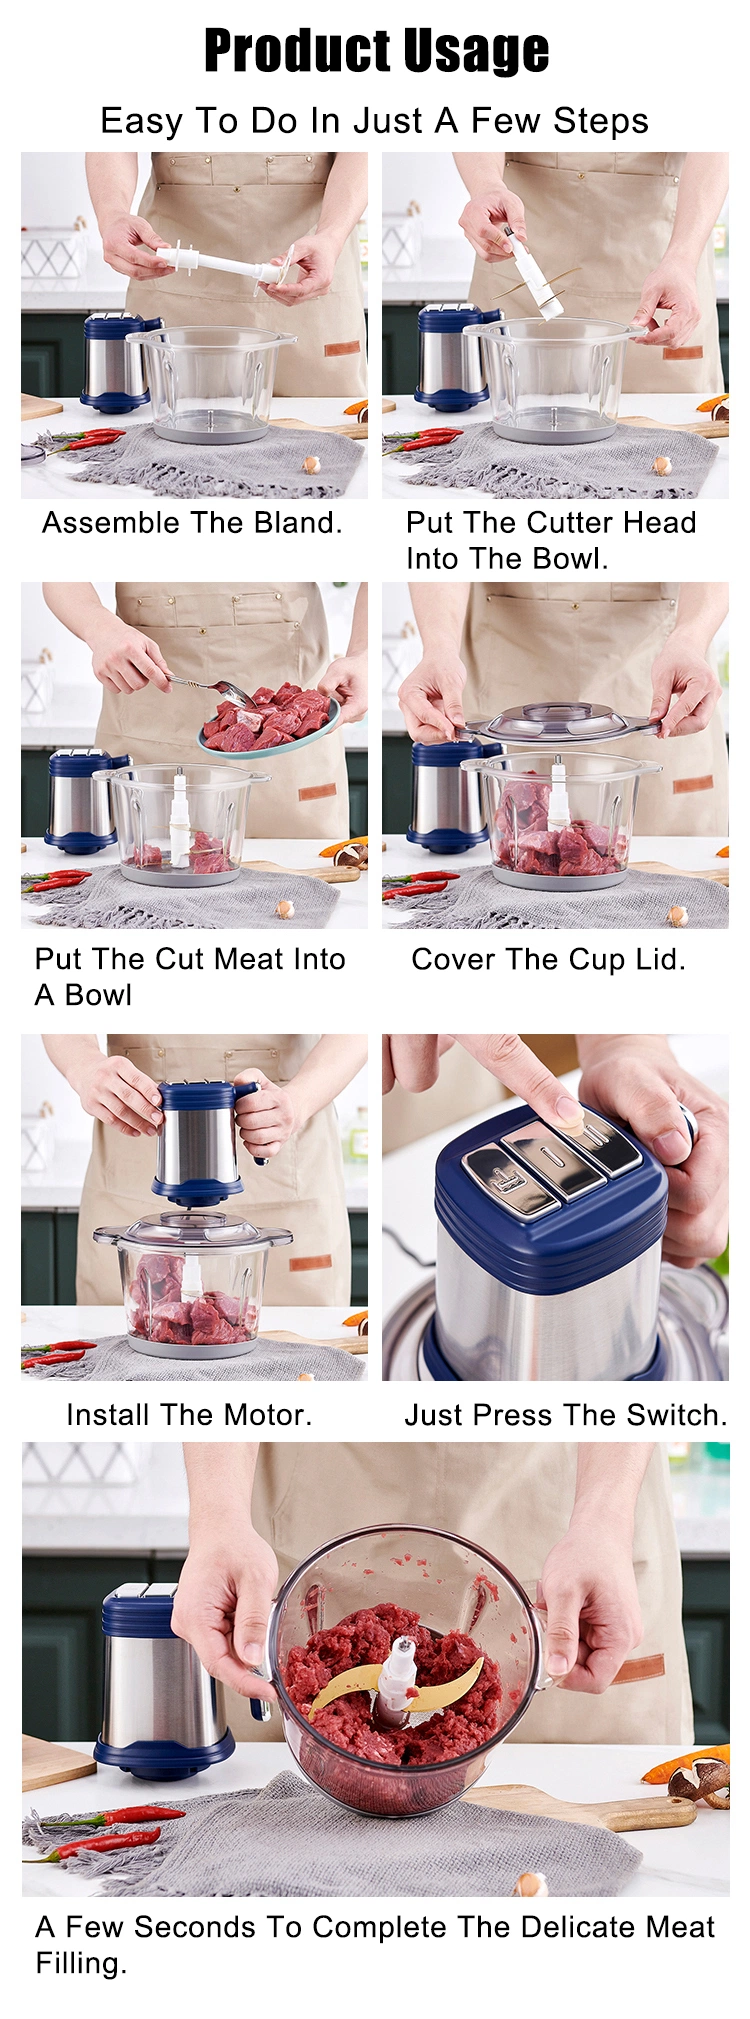 Mini Portable Meat Grinder USB Rechargeable Electric Food Chopper Wireless Mincer for Garlic Ginger Chili Onion Nuts